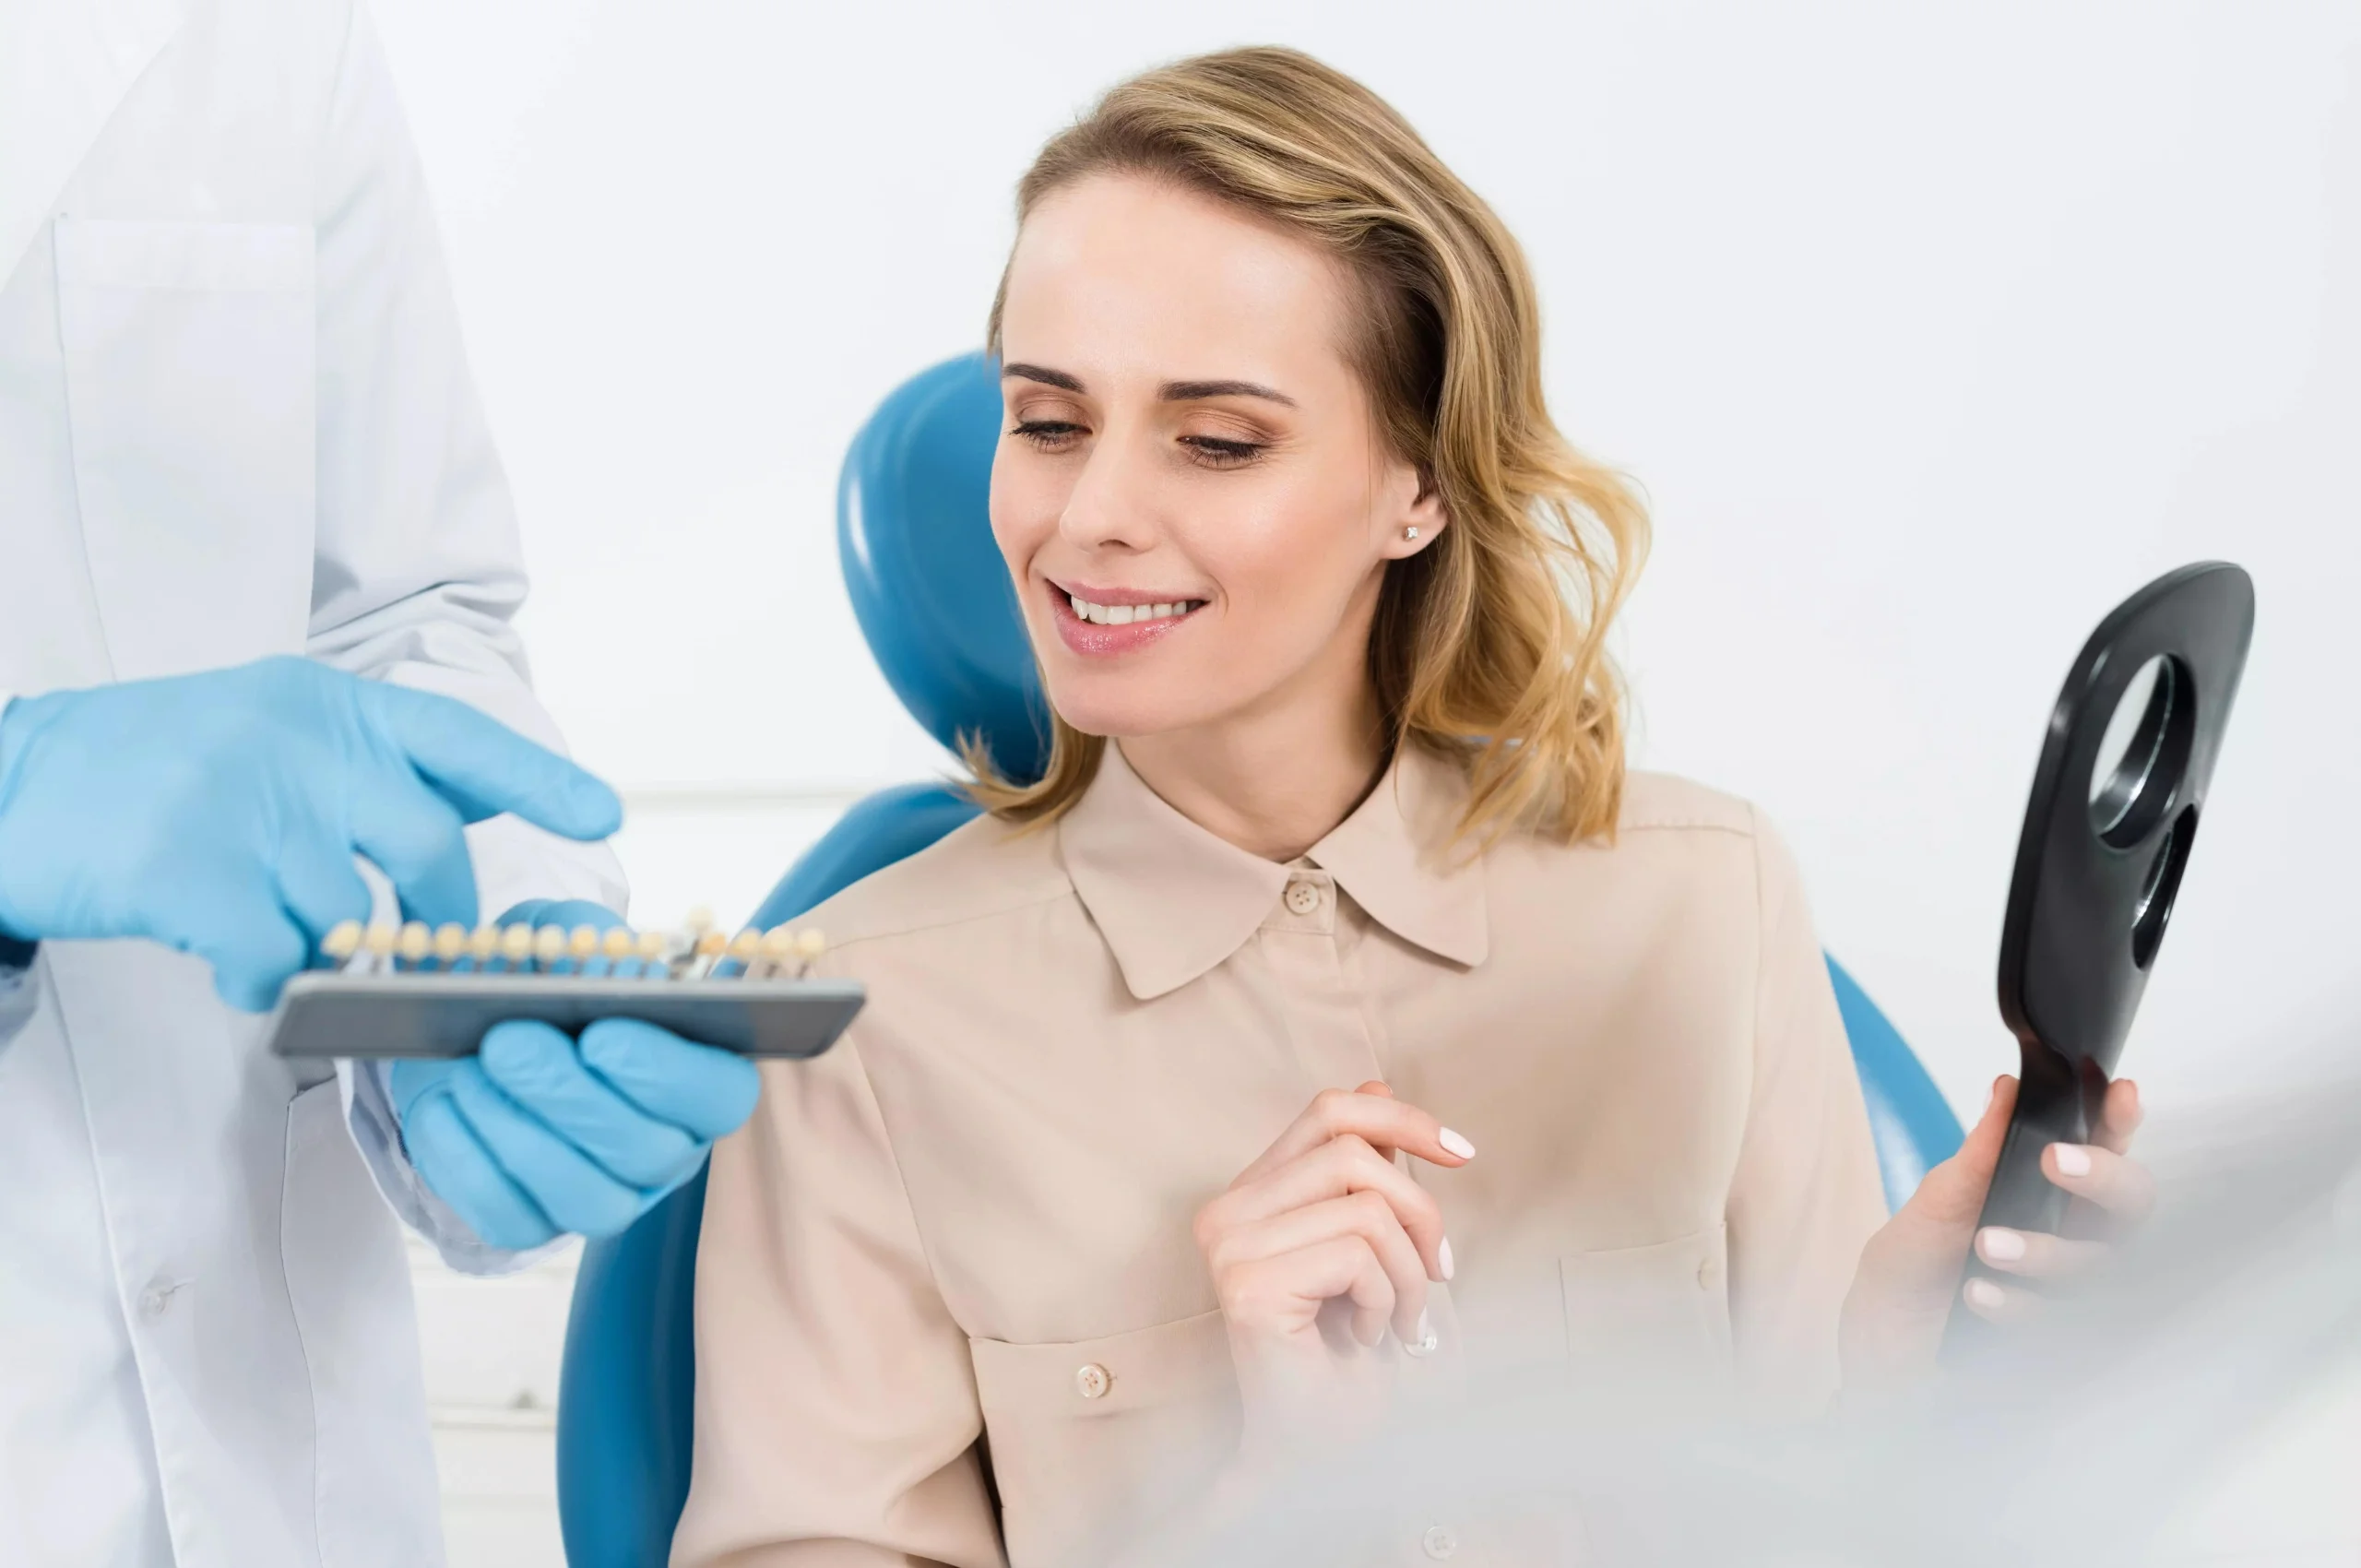 Dentist showing tooth implants to female patient